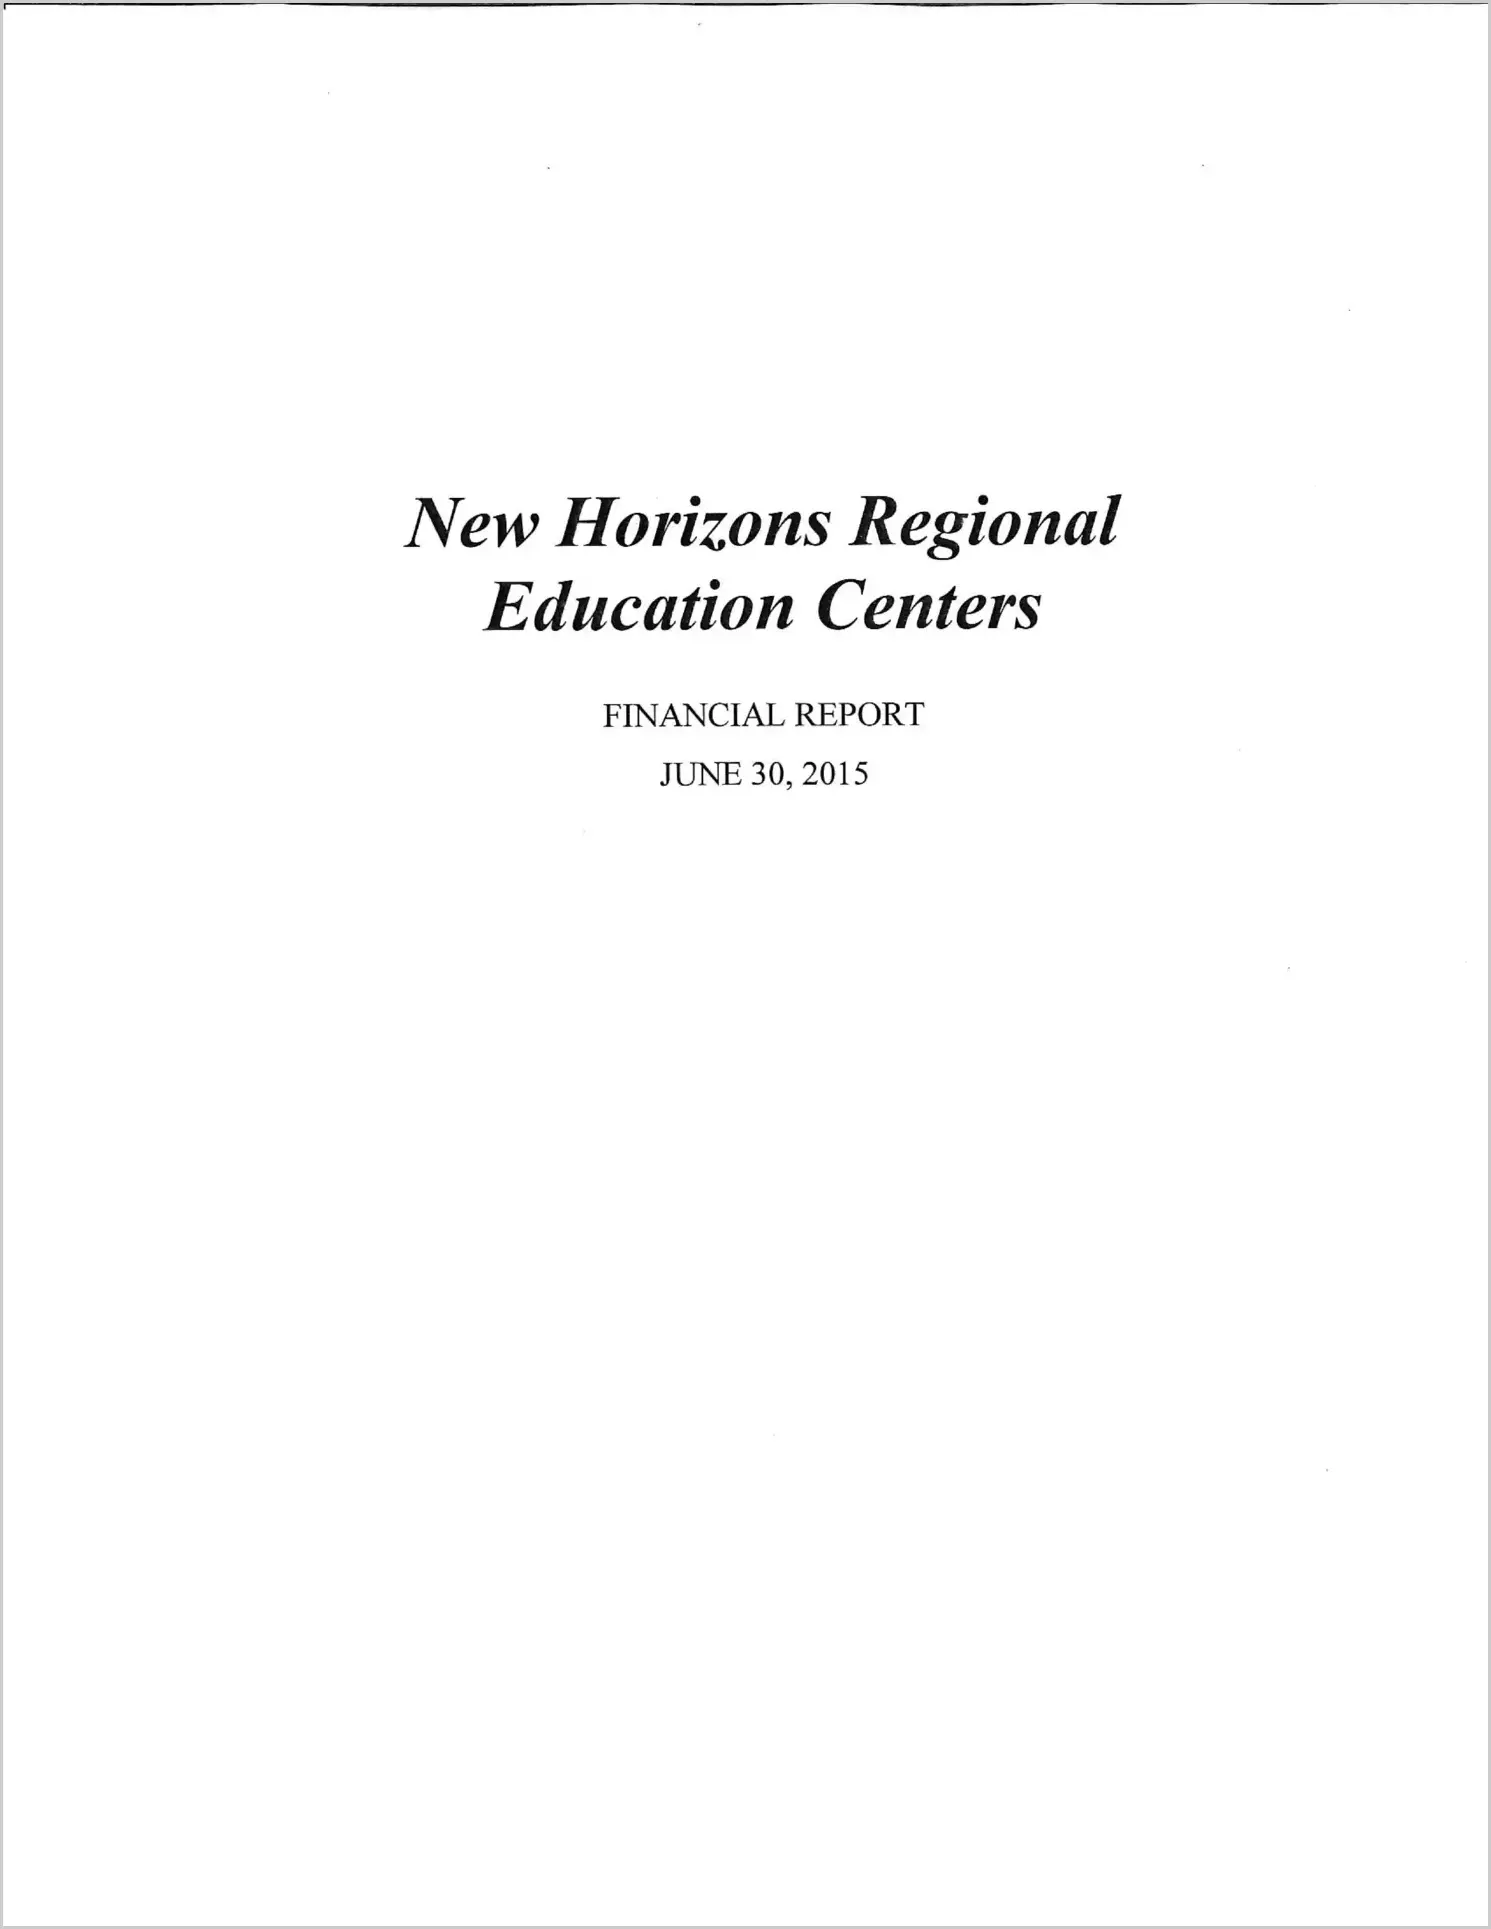 2015 ABC/Other Annual Financial Report  for New Horizons Regional Education Centers